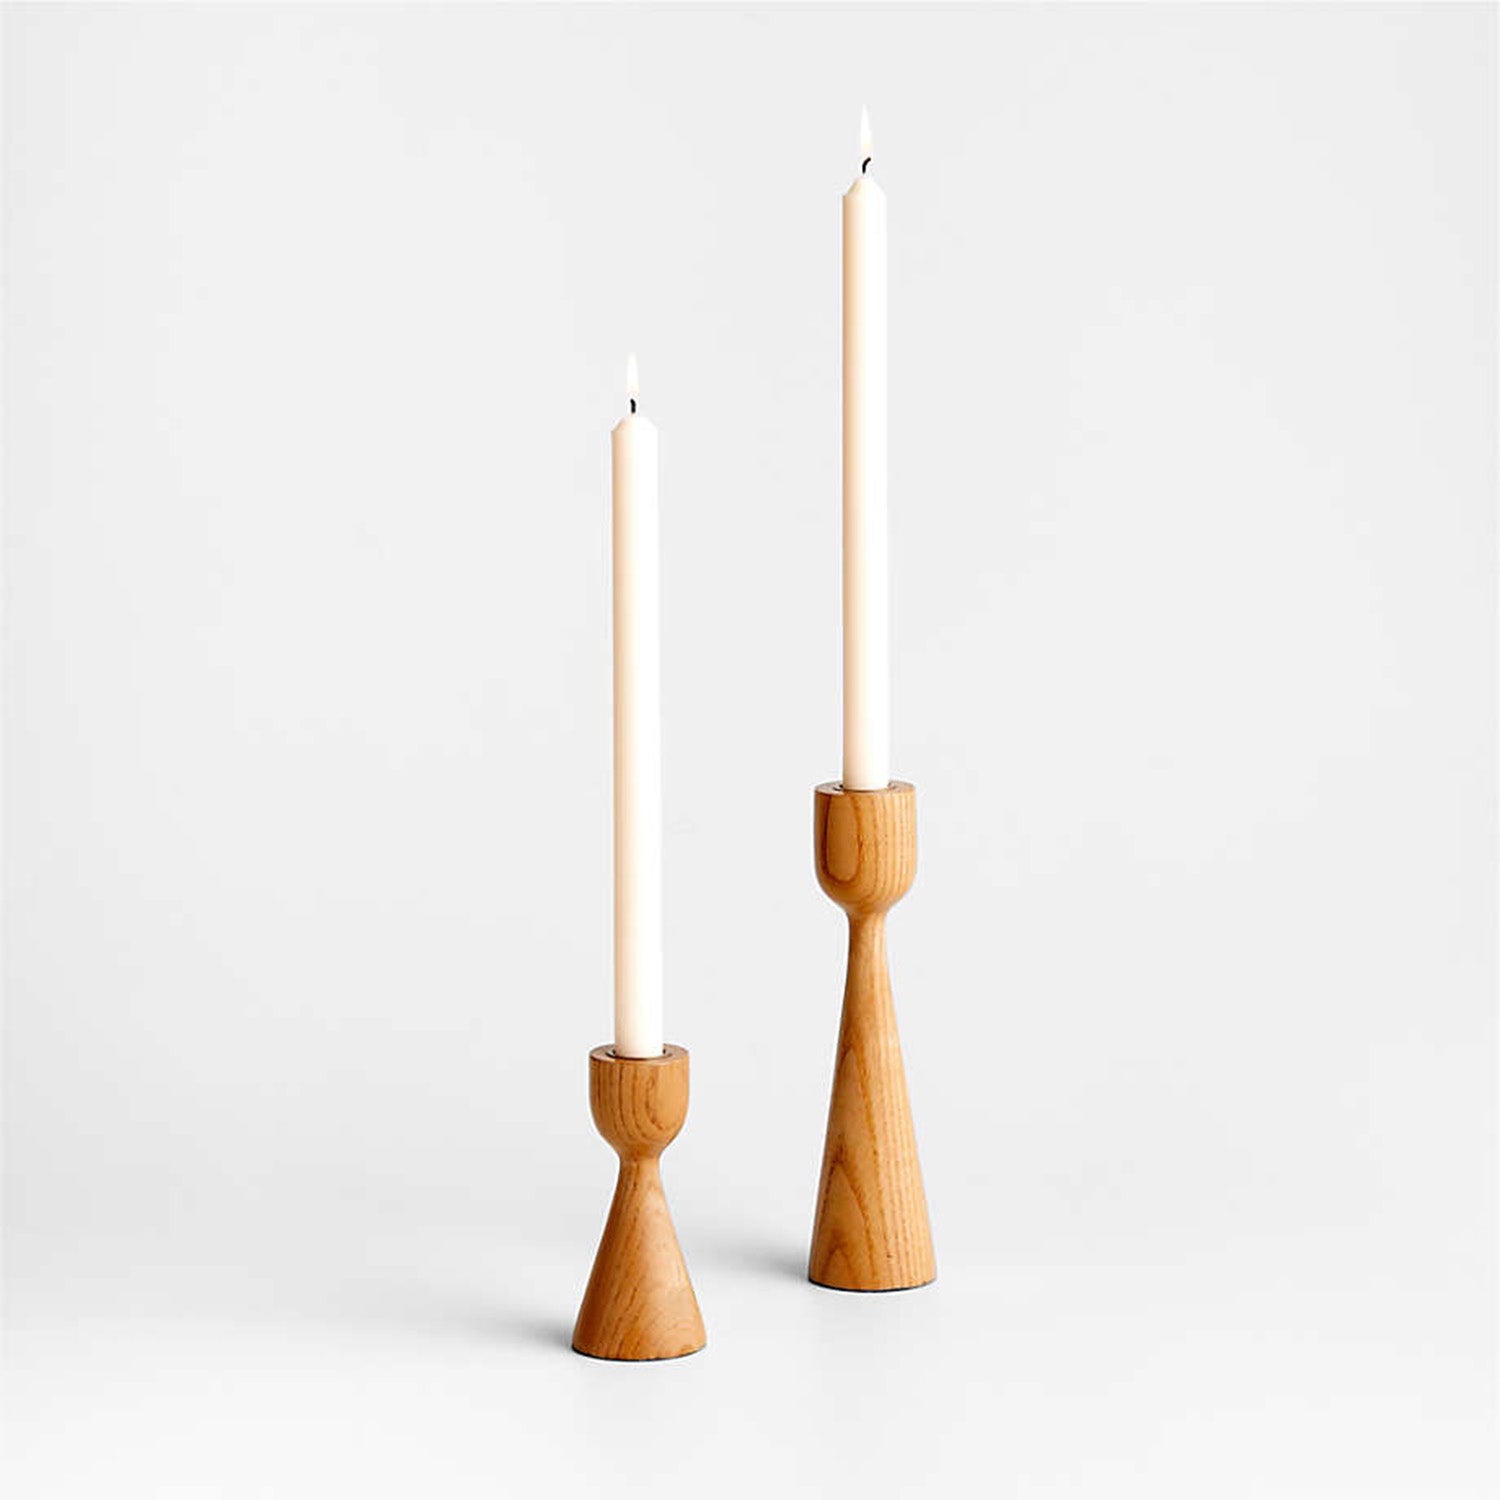 Candlesticks by Molly Baz